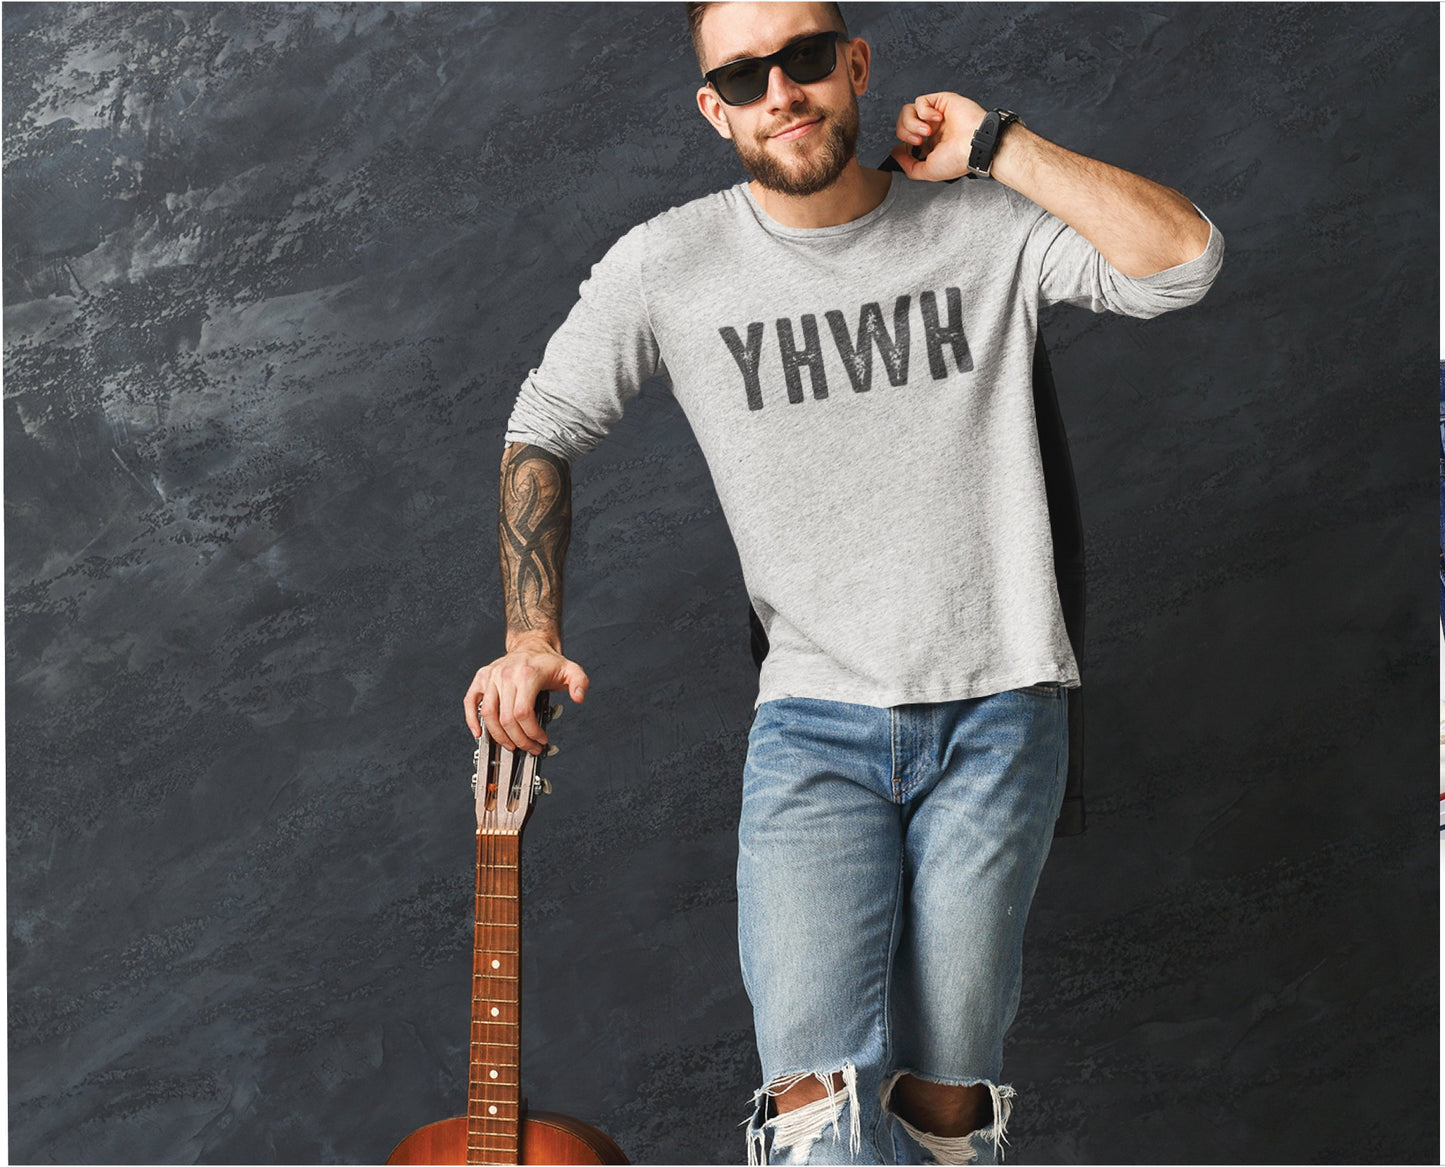 YHWH Hebrew Biblical Name of God Yahweh Christian aesthetic design printed in charcoal on soft heather gray long sleeve tee for men and women